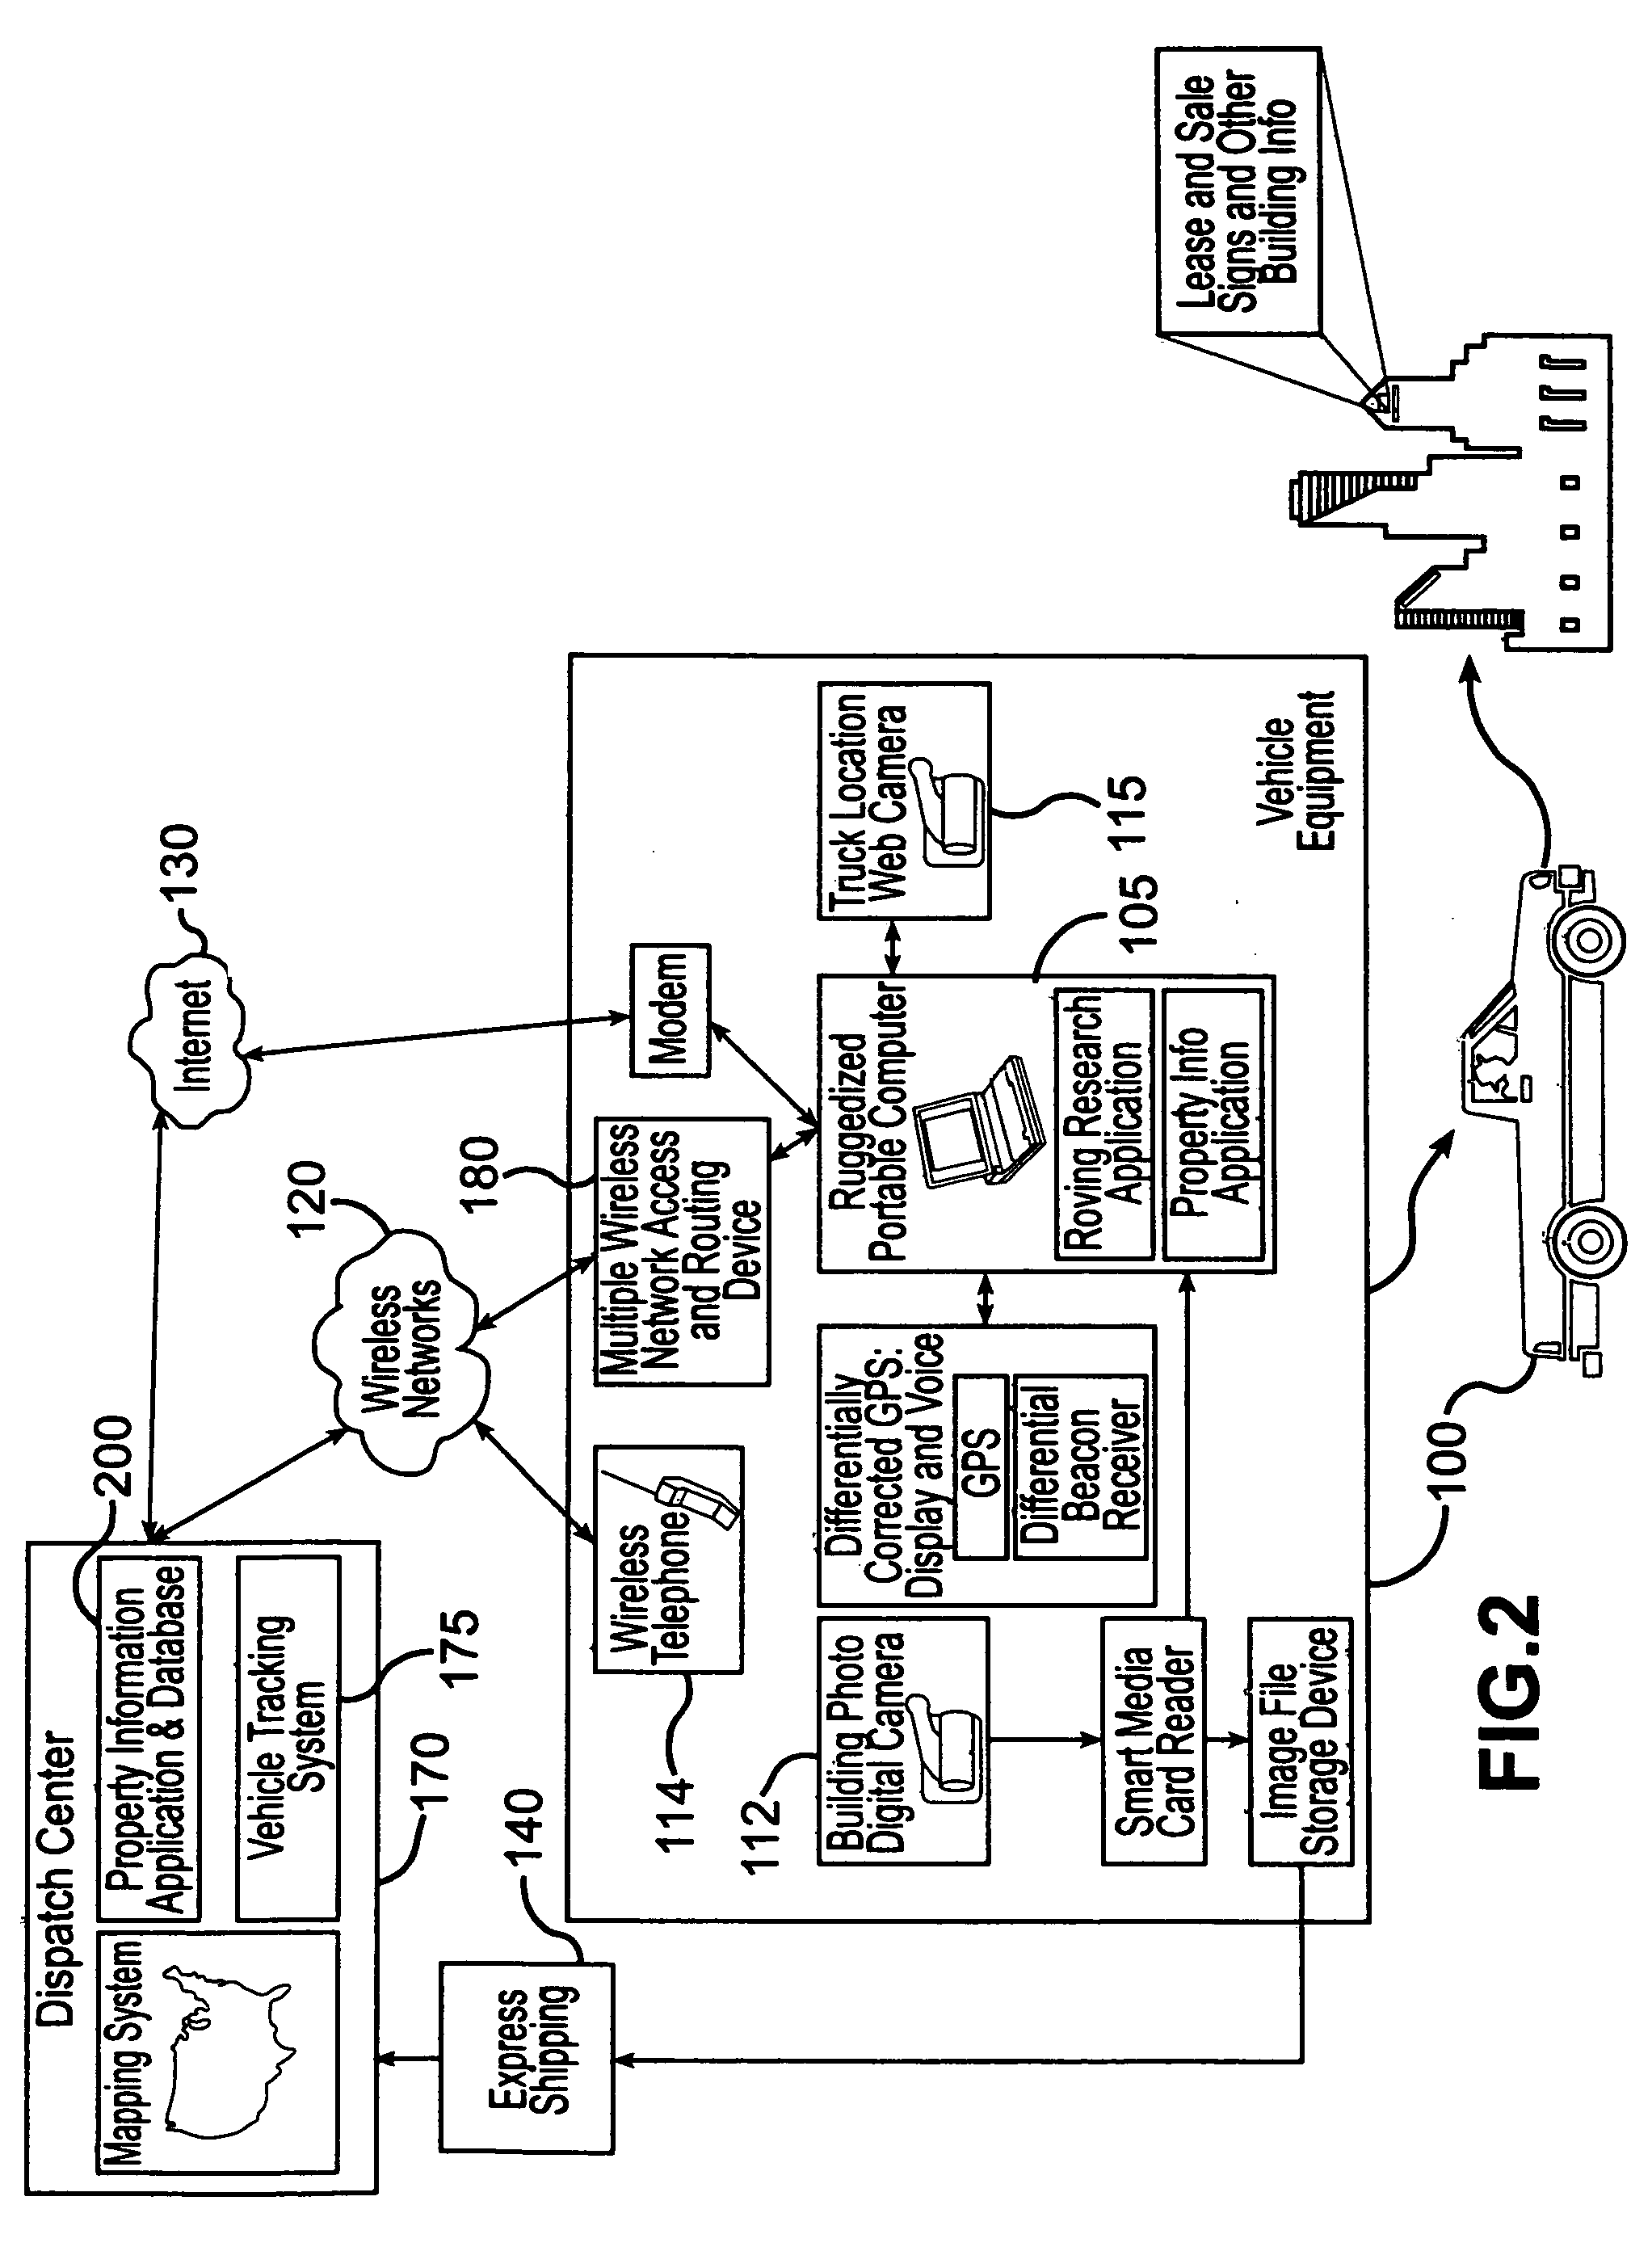 System and method for accessing geographic-based data